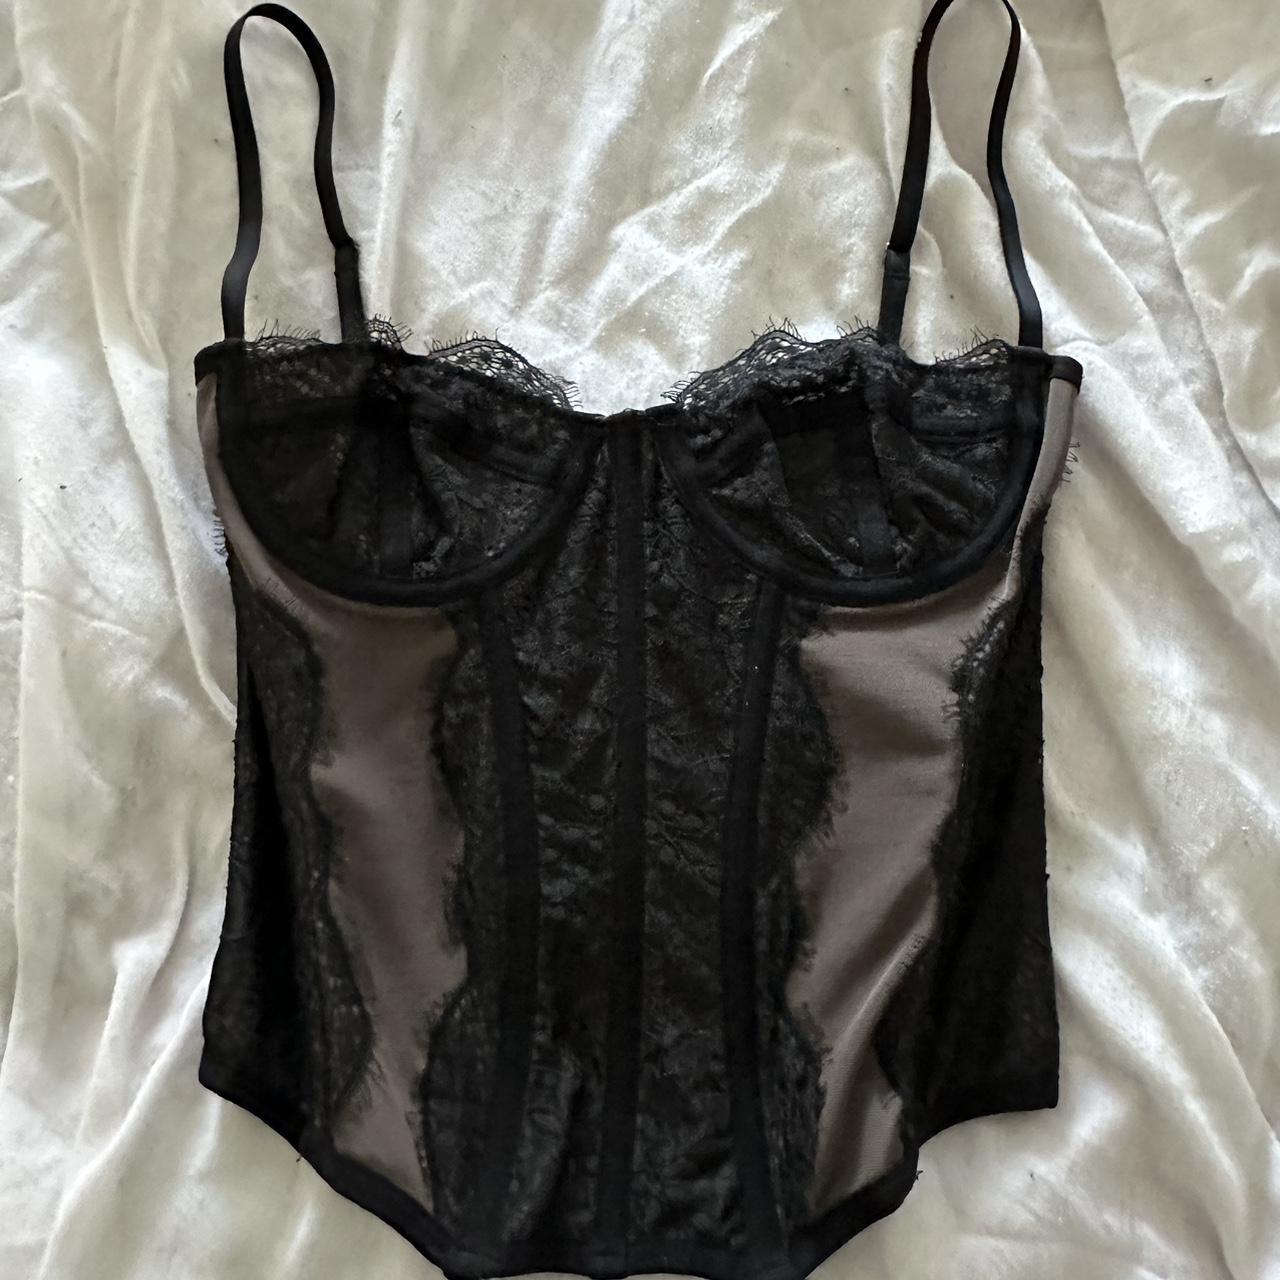 Urban Outfitters Modern Love Corset in Black Floral - Depop